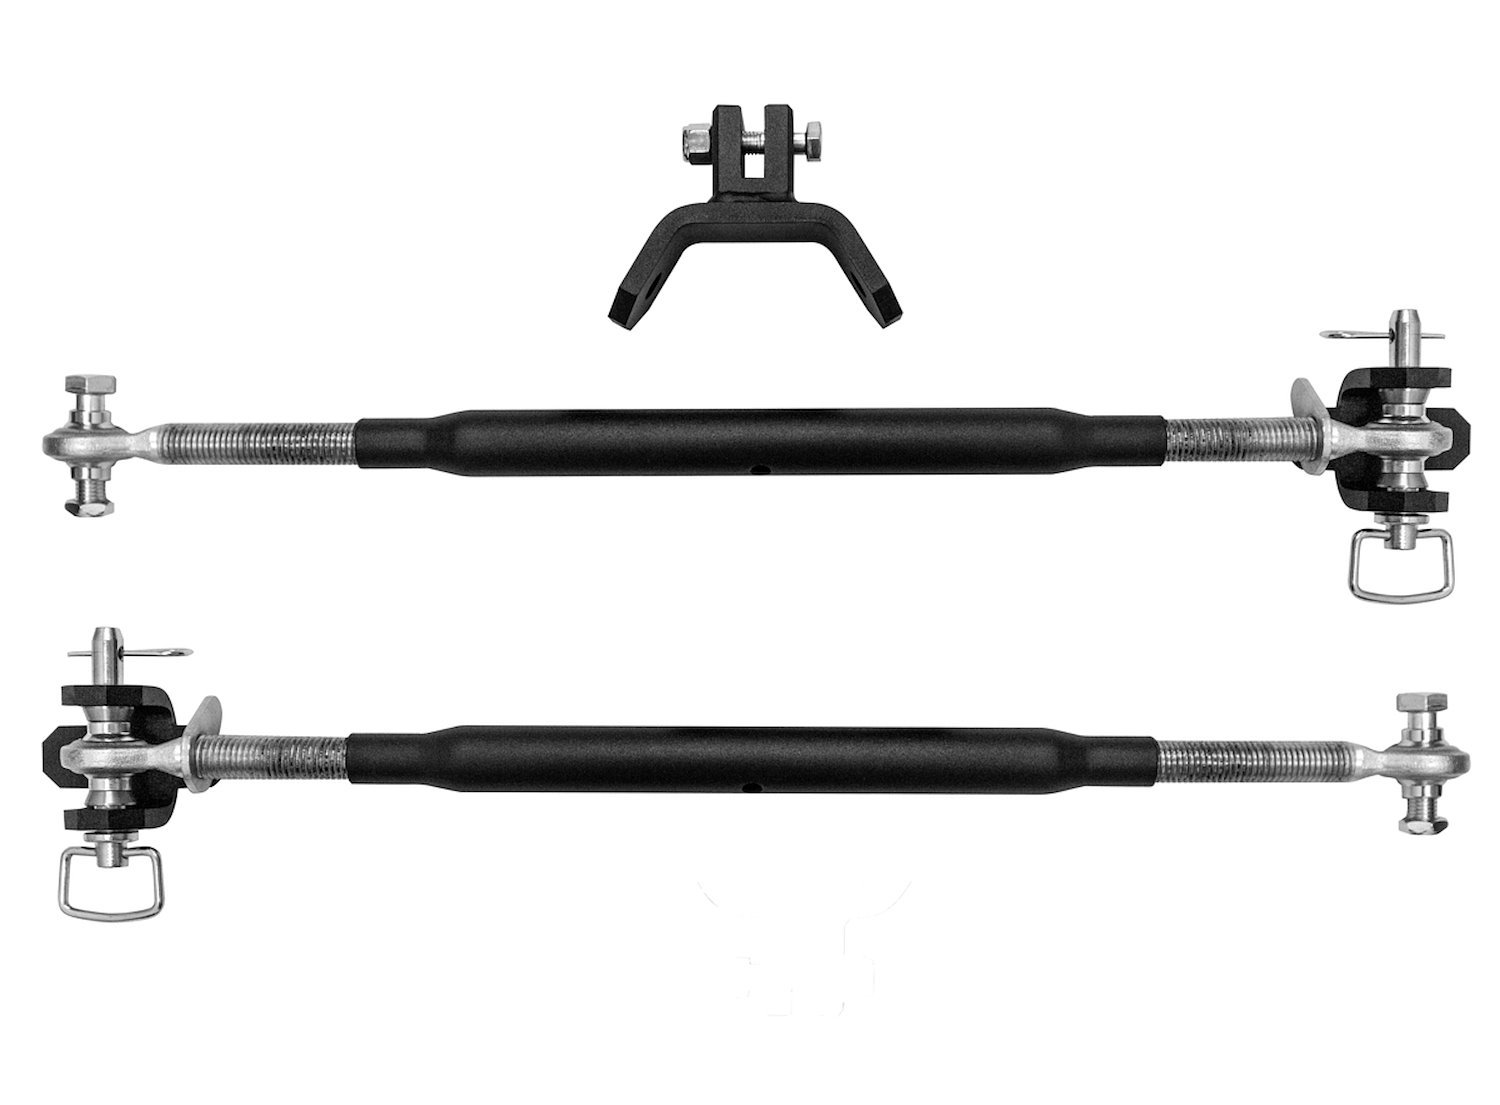 STABILIZERBARS Frame-Mounted Hitch Stabilizer Bars